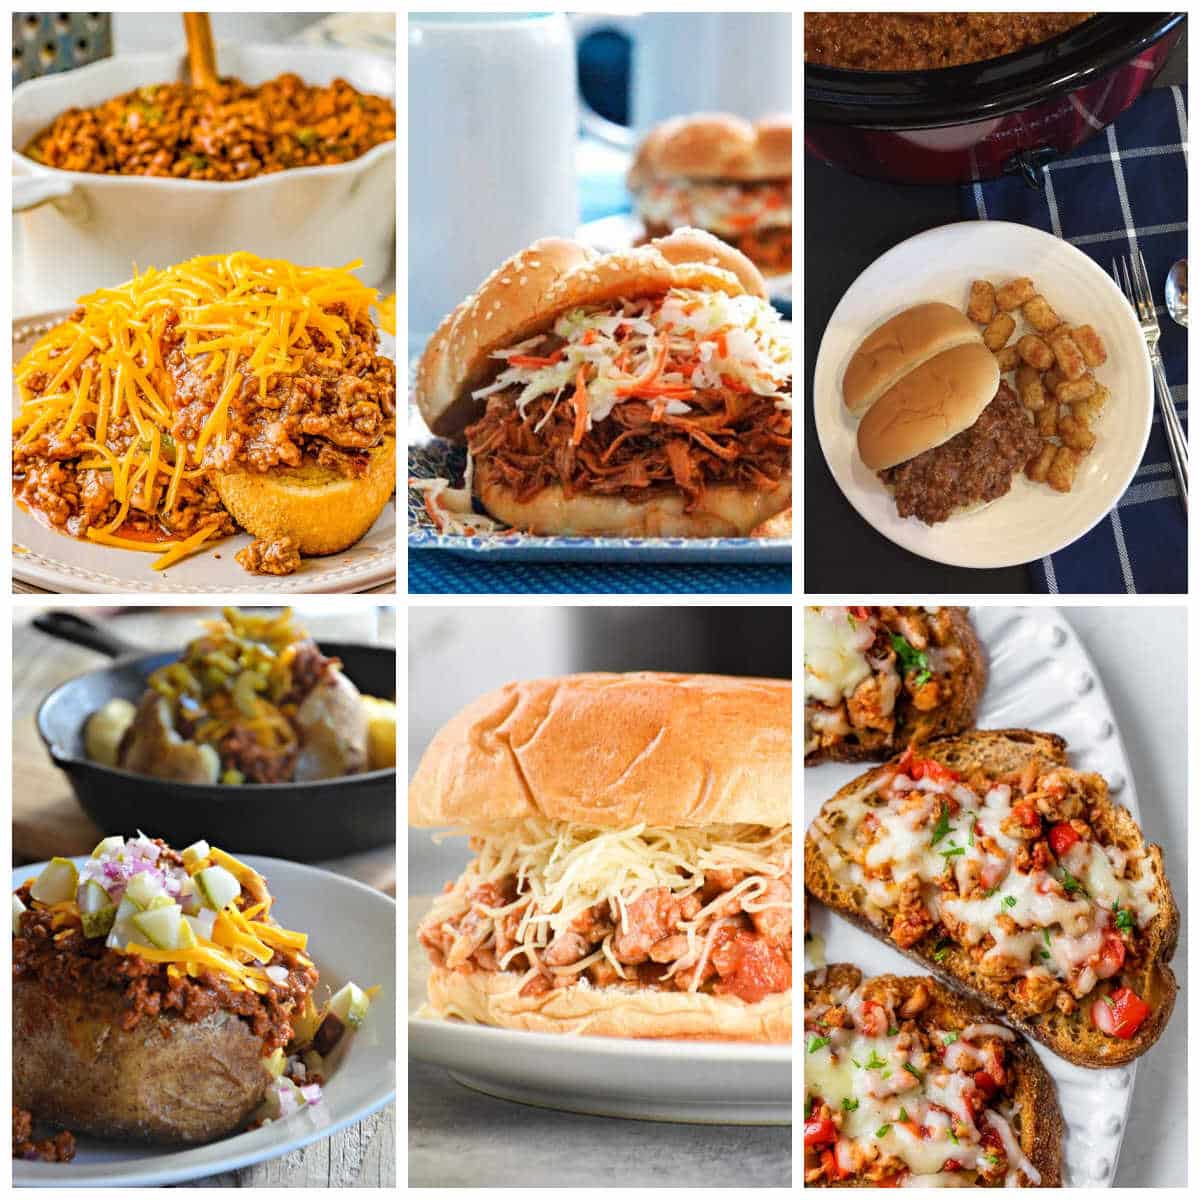 Slow Cooker Sloppy Joes collage showing featured recipes.